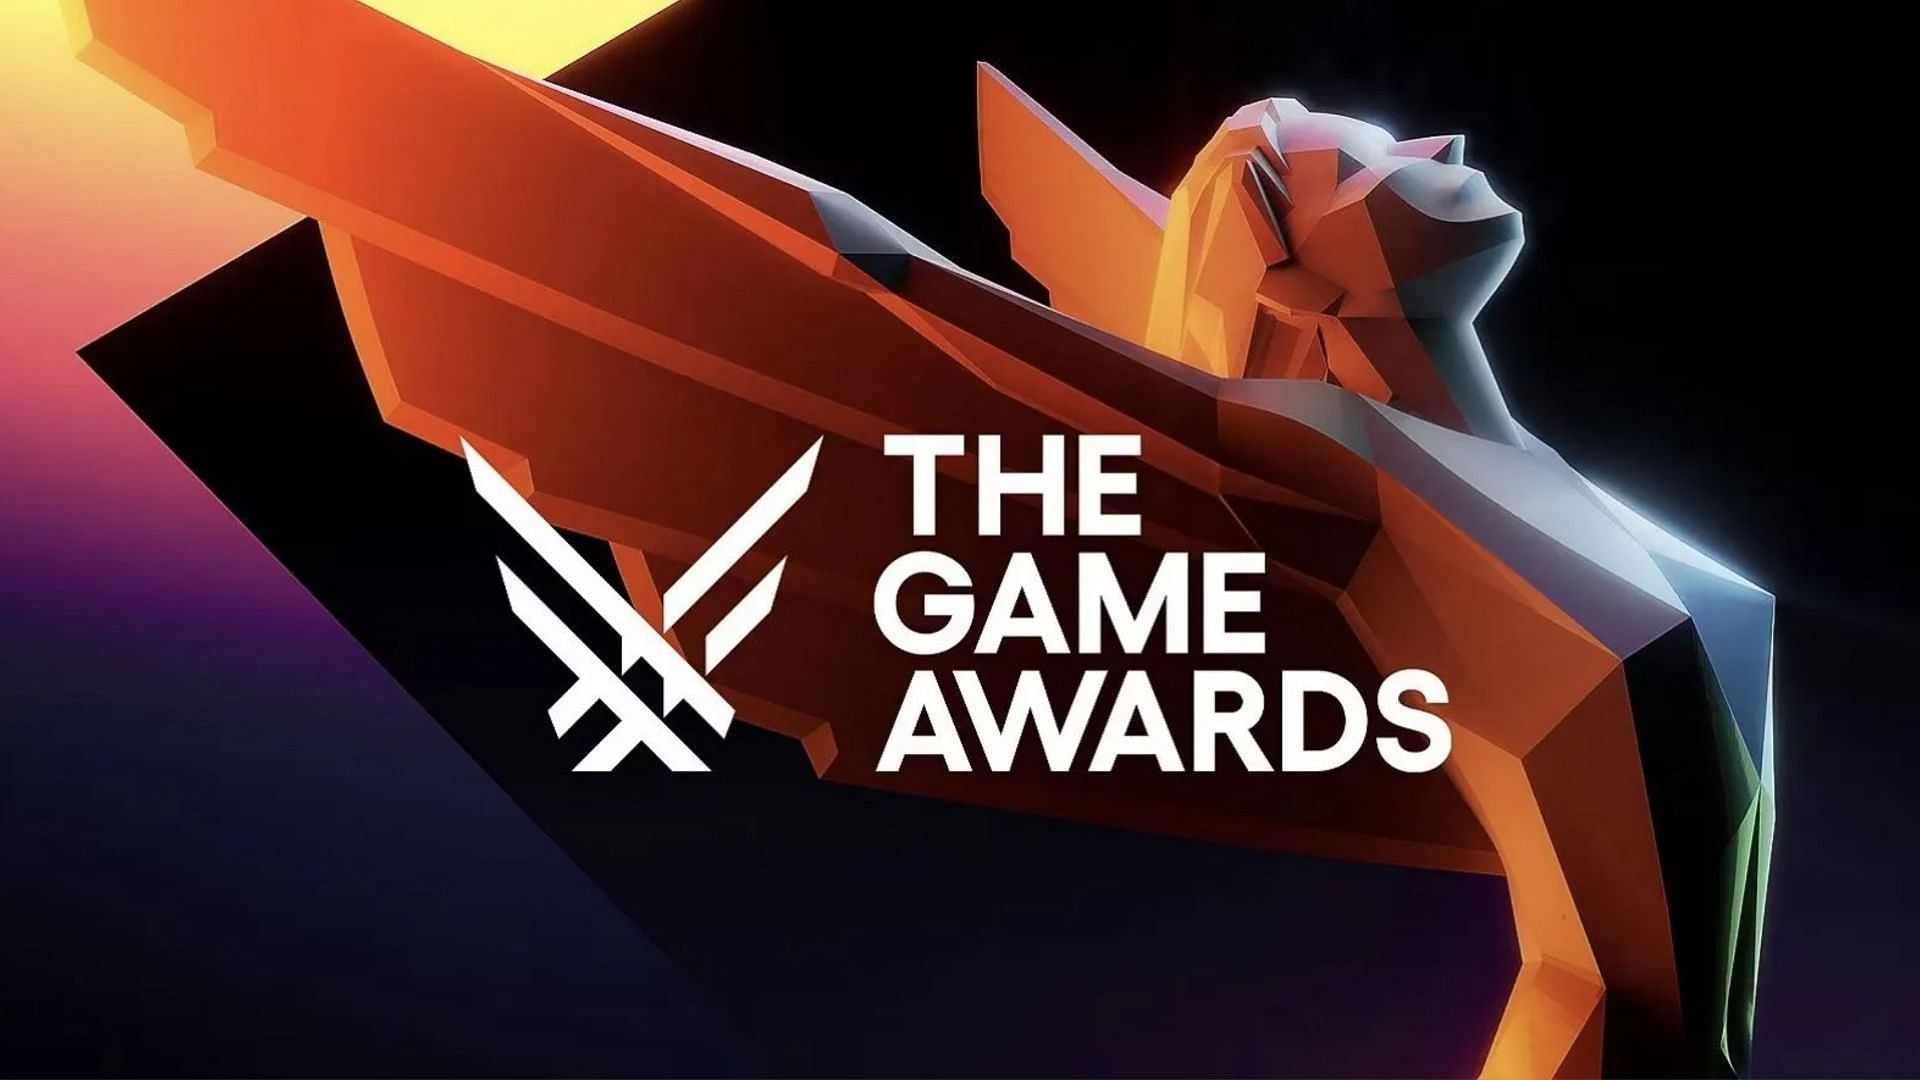 The Game Awards 2023 is about to have its nominations revealed.